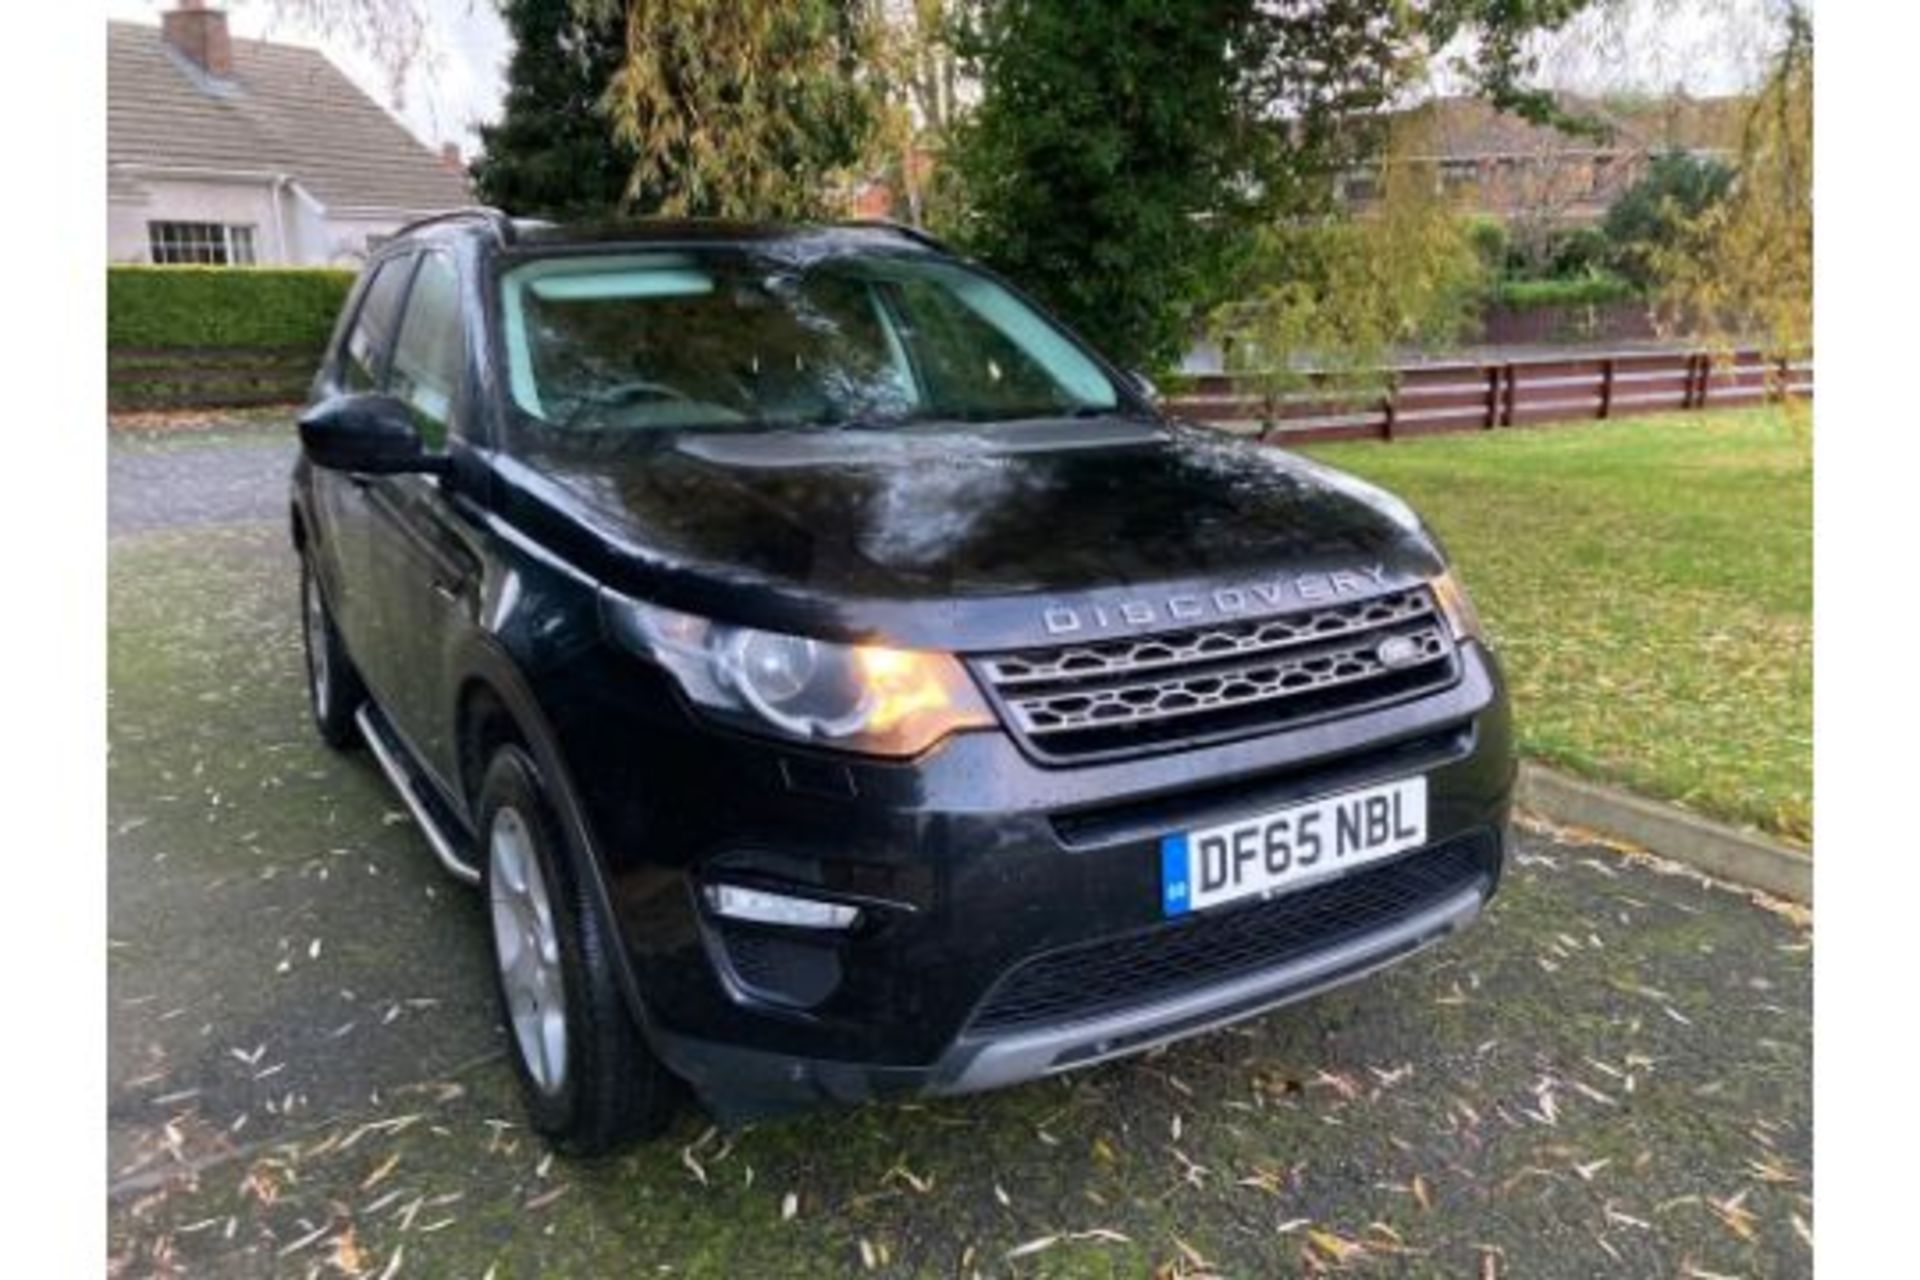 LAND ROVER DISCOVERY SPORT 2.0 TD4 SE TECH 150 S/S  STARTS RUNS AND DRIVES REGISTERED: 18th Nov 2015